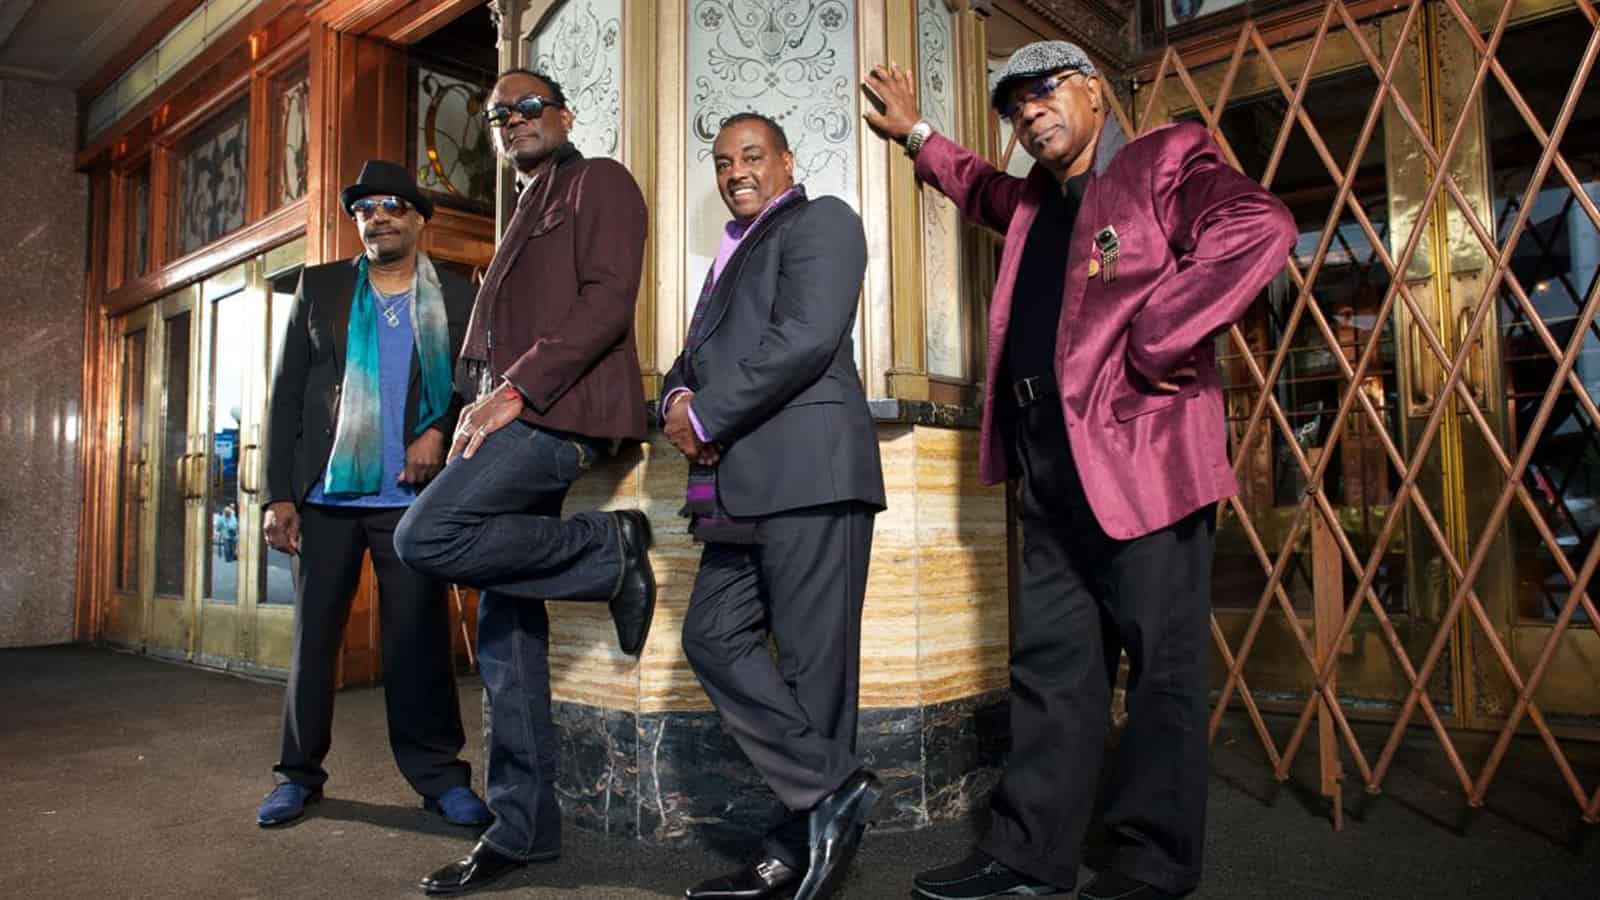 Kool and the Gang Innsbrook After Hours